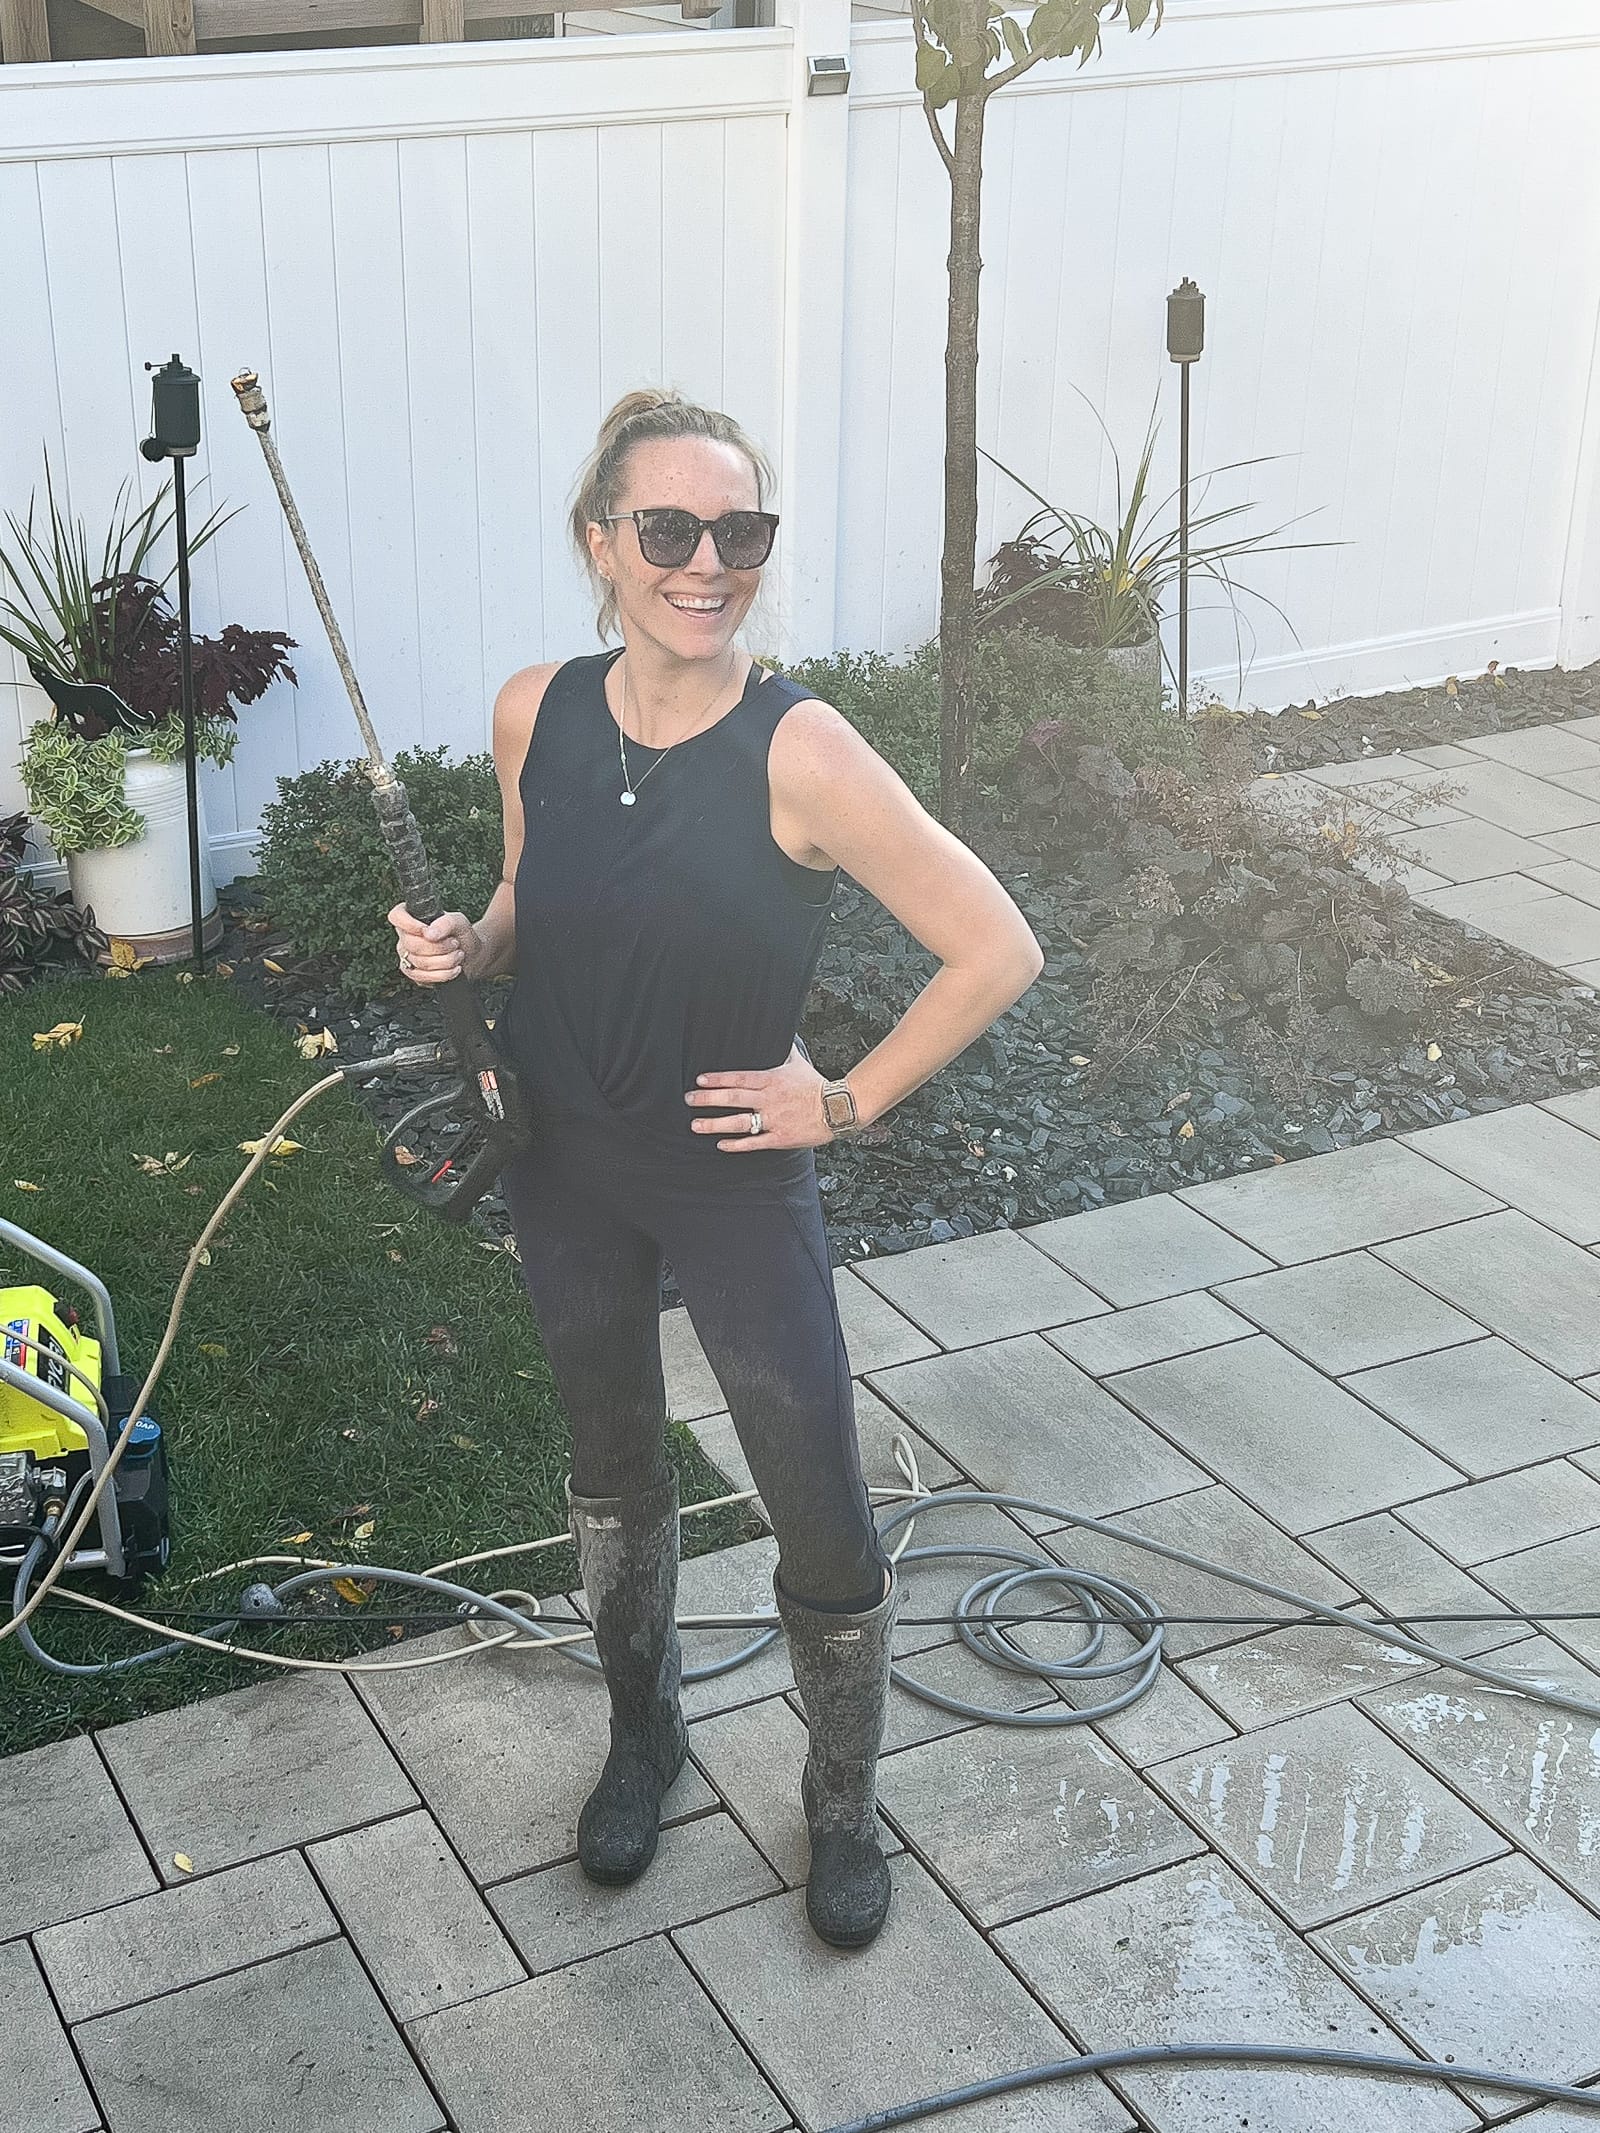 Using a pressure washer before installing polymeric sand